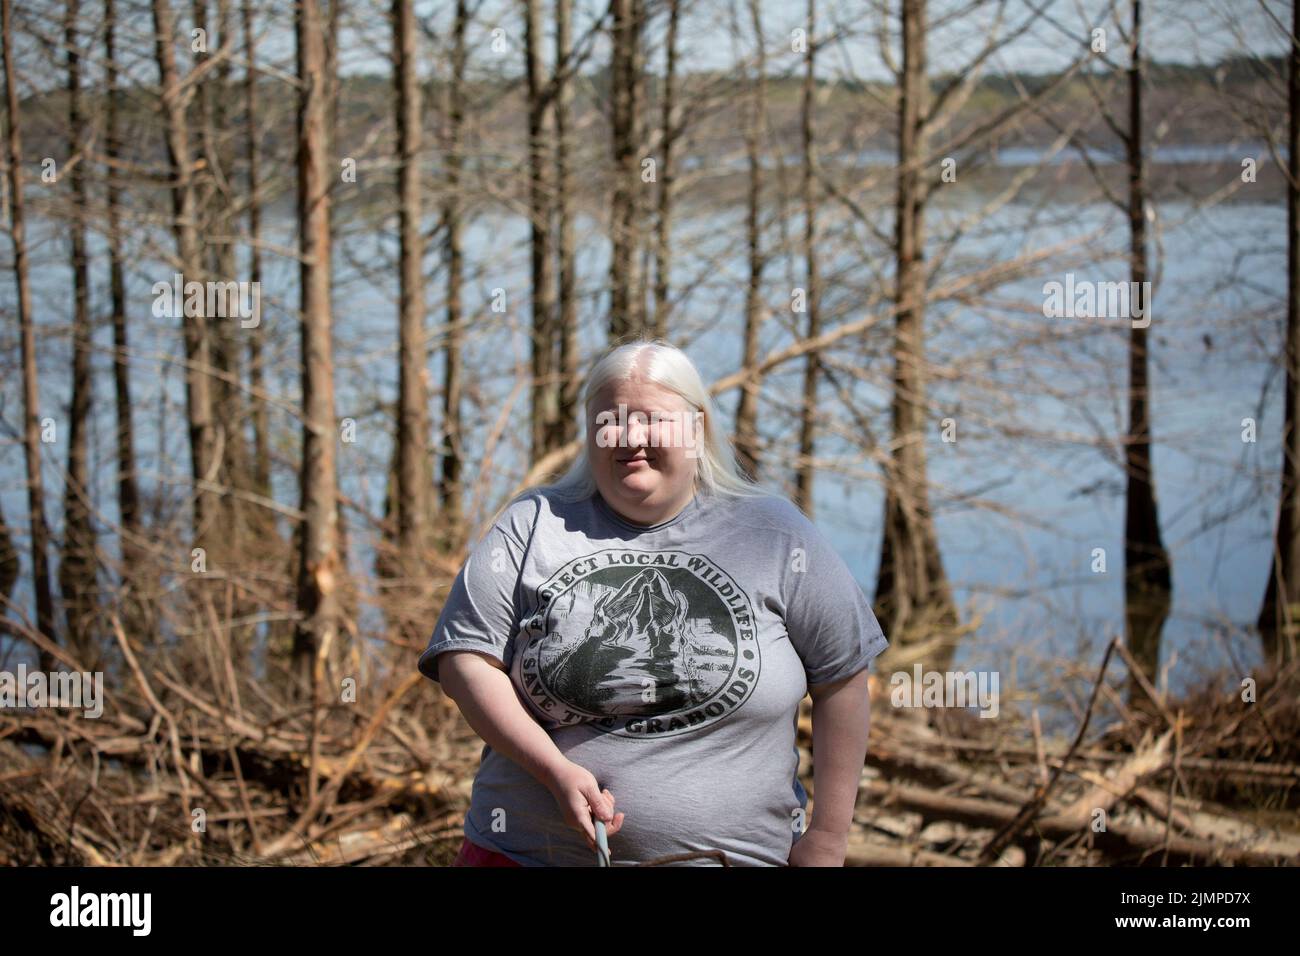 Albino woman holding a cane and smiling in front of a tree line near a shore Stock Photo